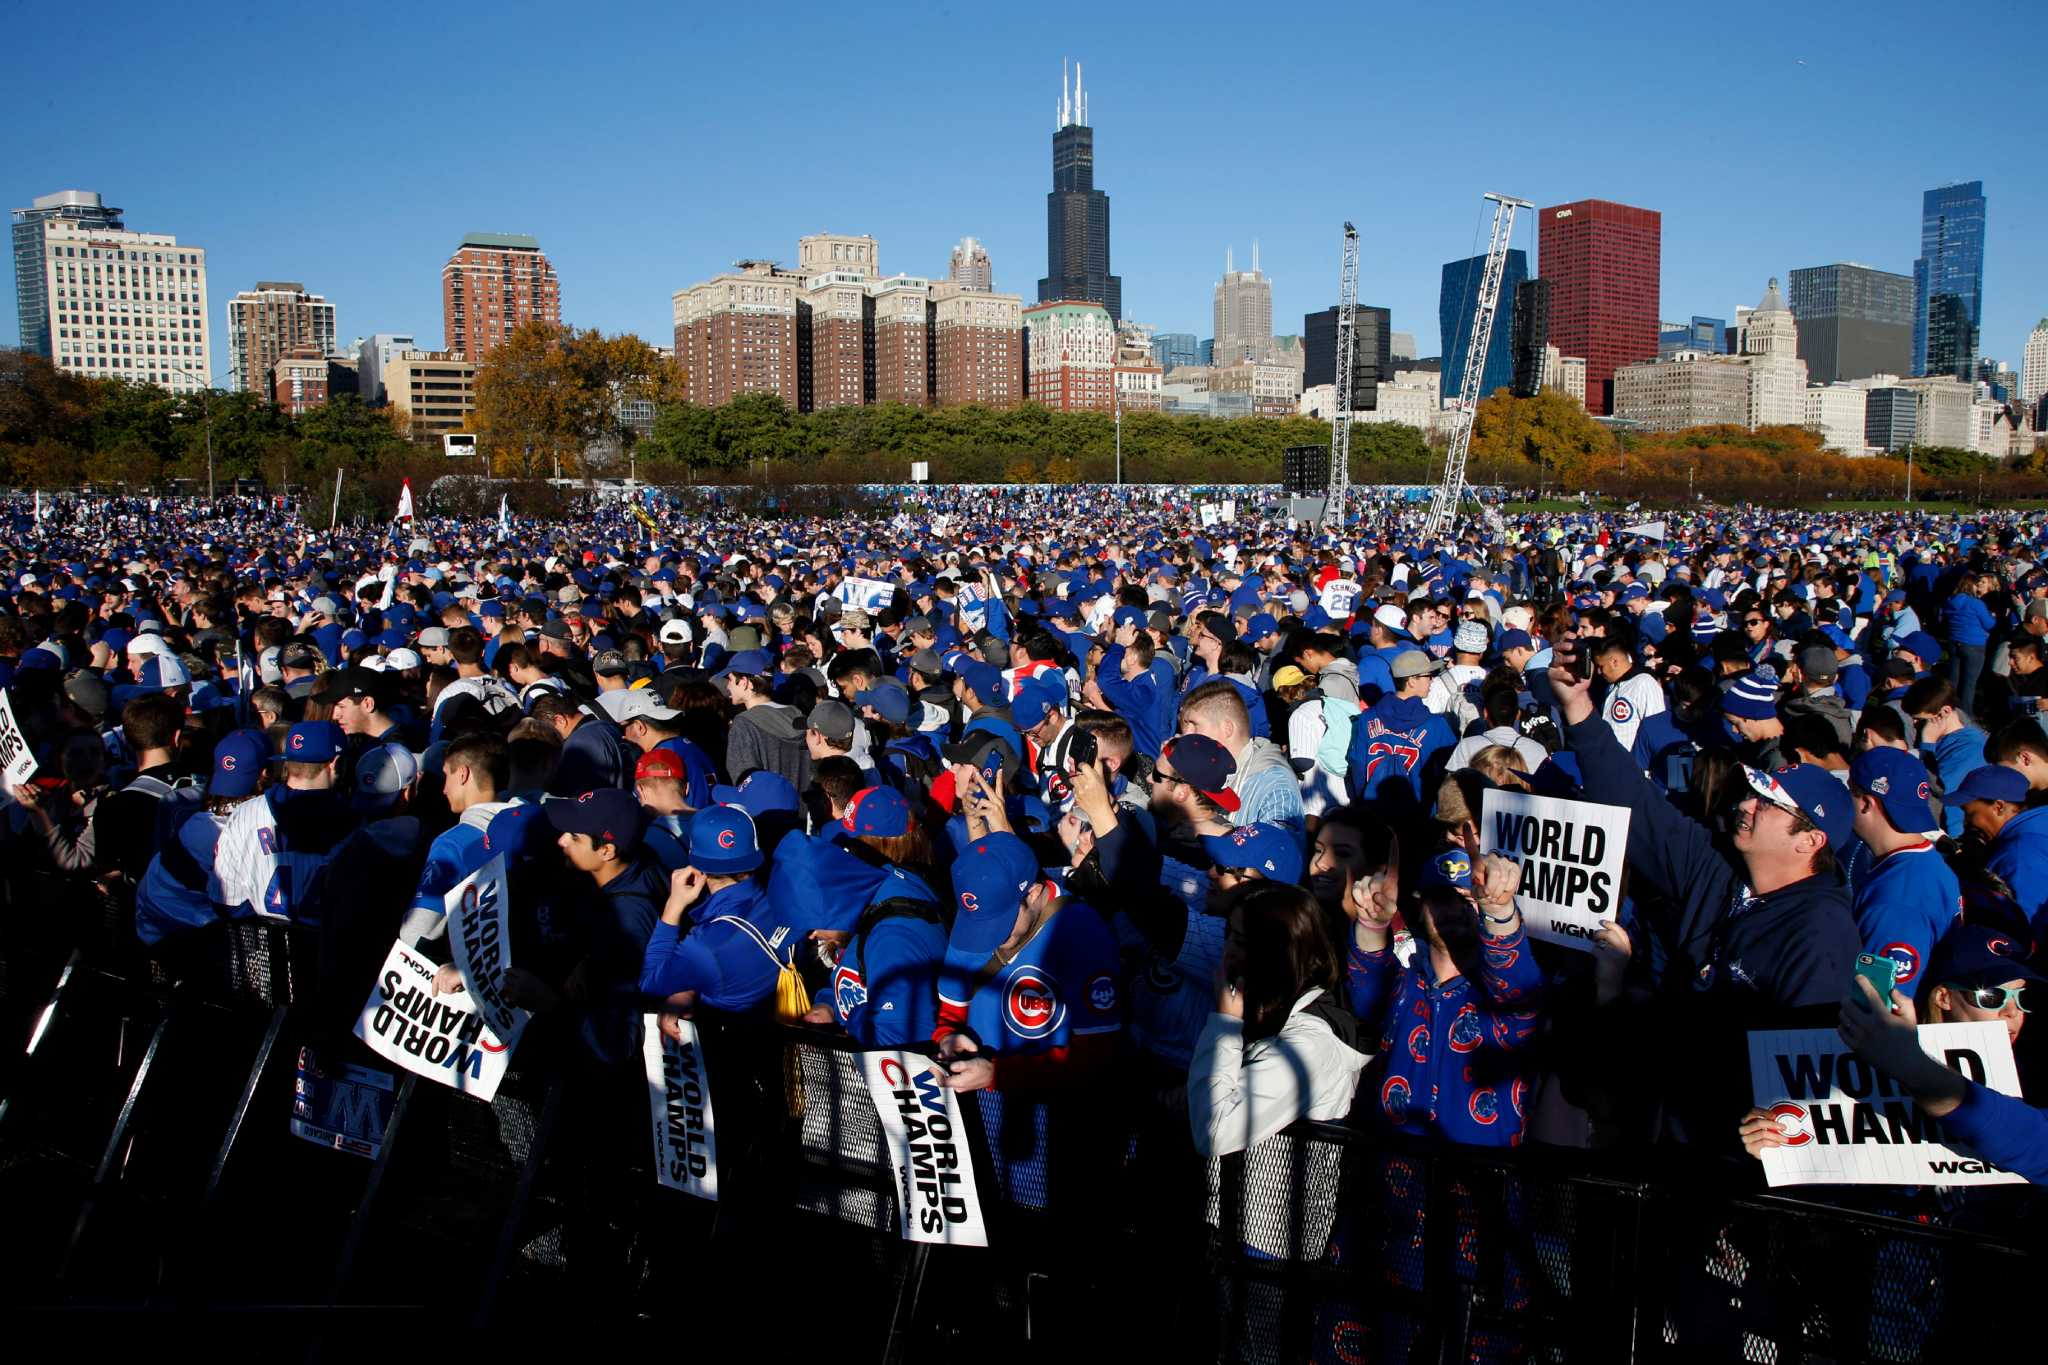 Chicago Cubs parade: Fans swarm streets hours ahead